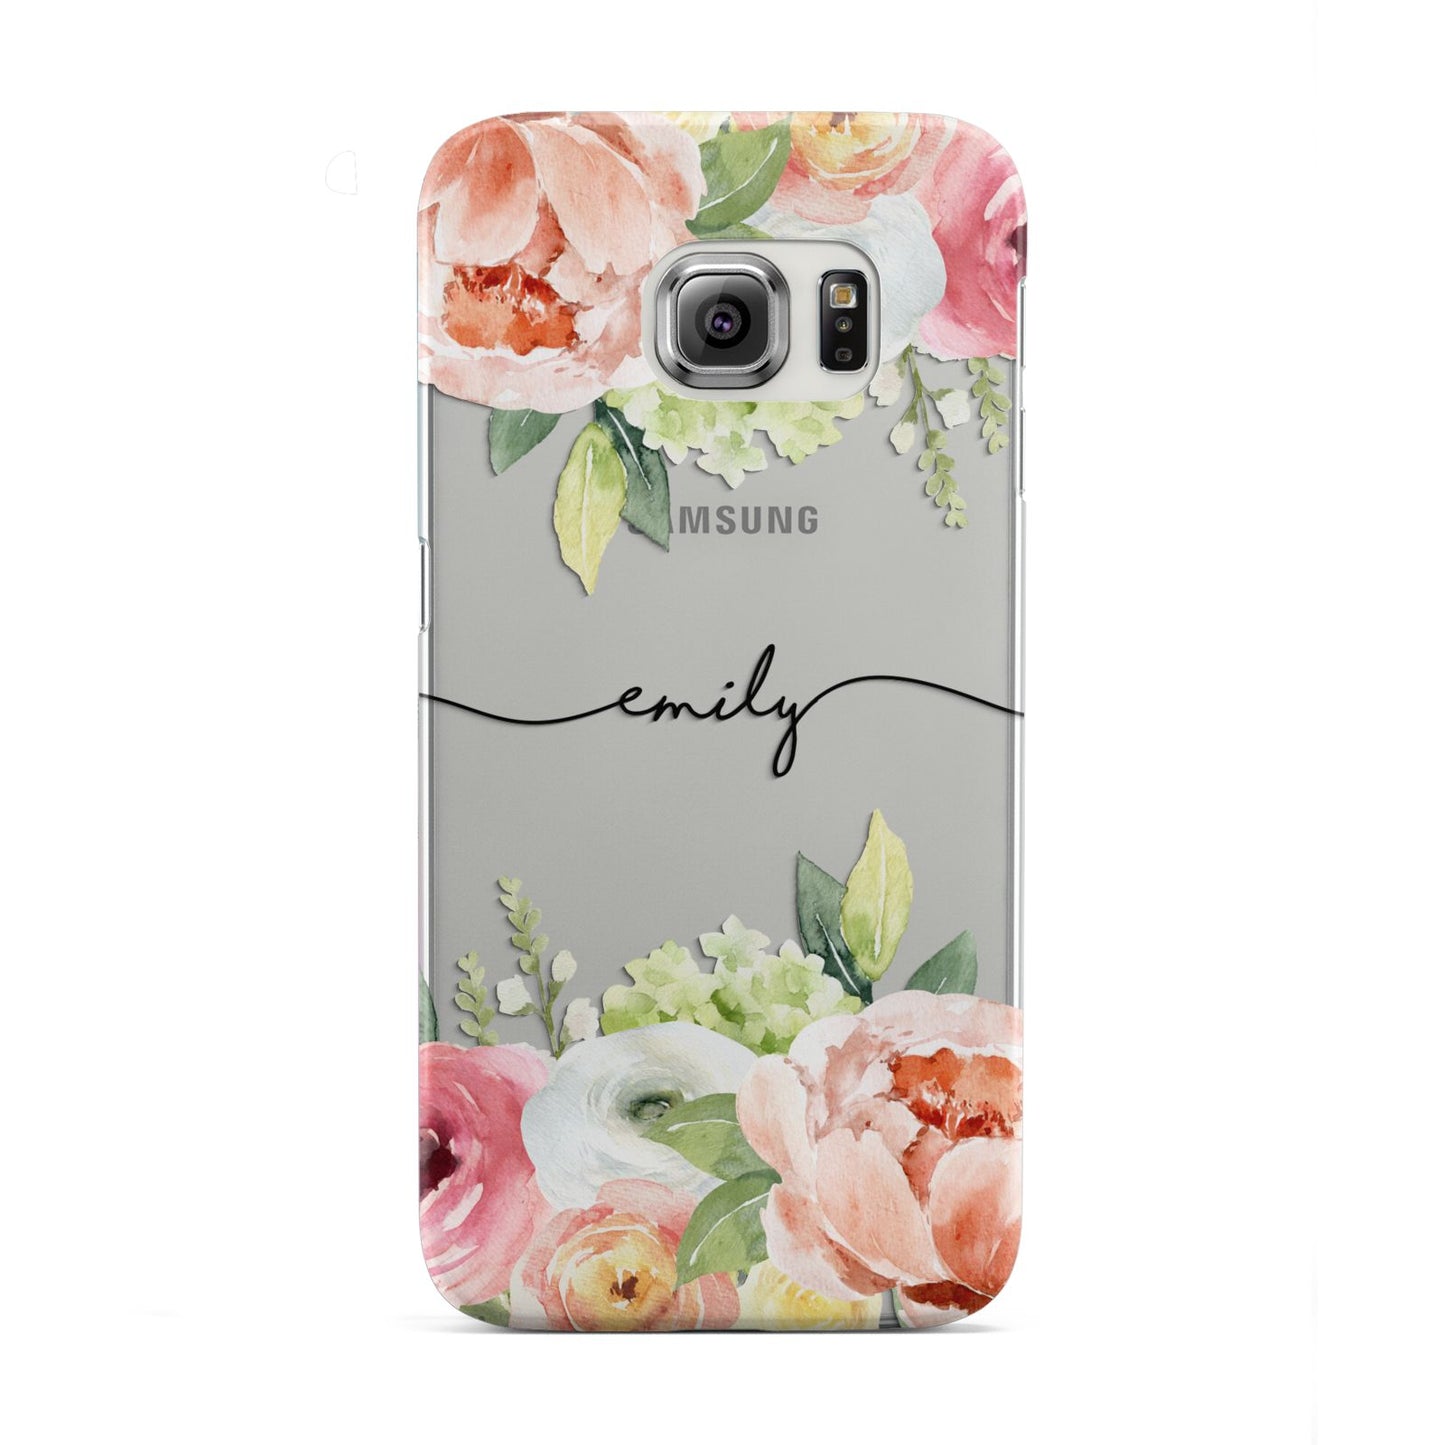 Personalised Flowers Samsung Galaxy S6 Edge Case